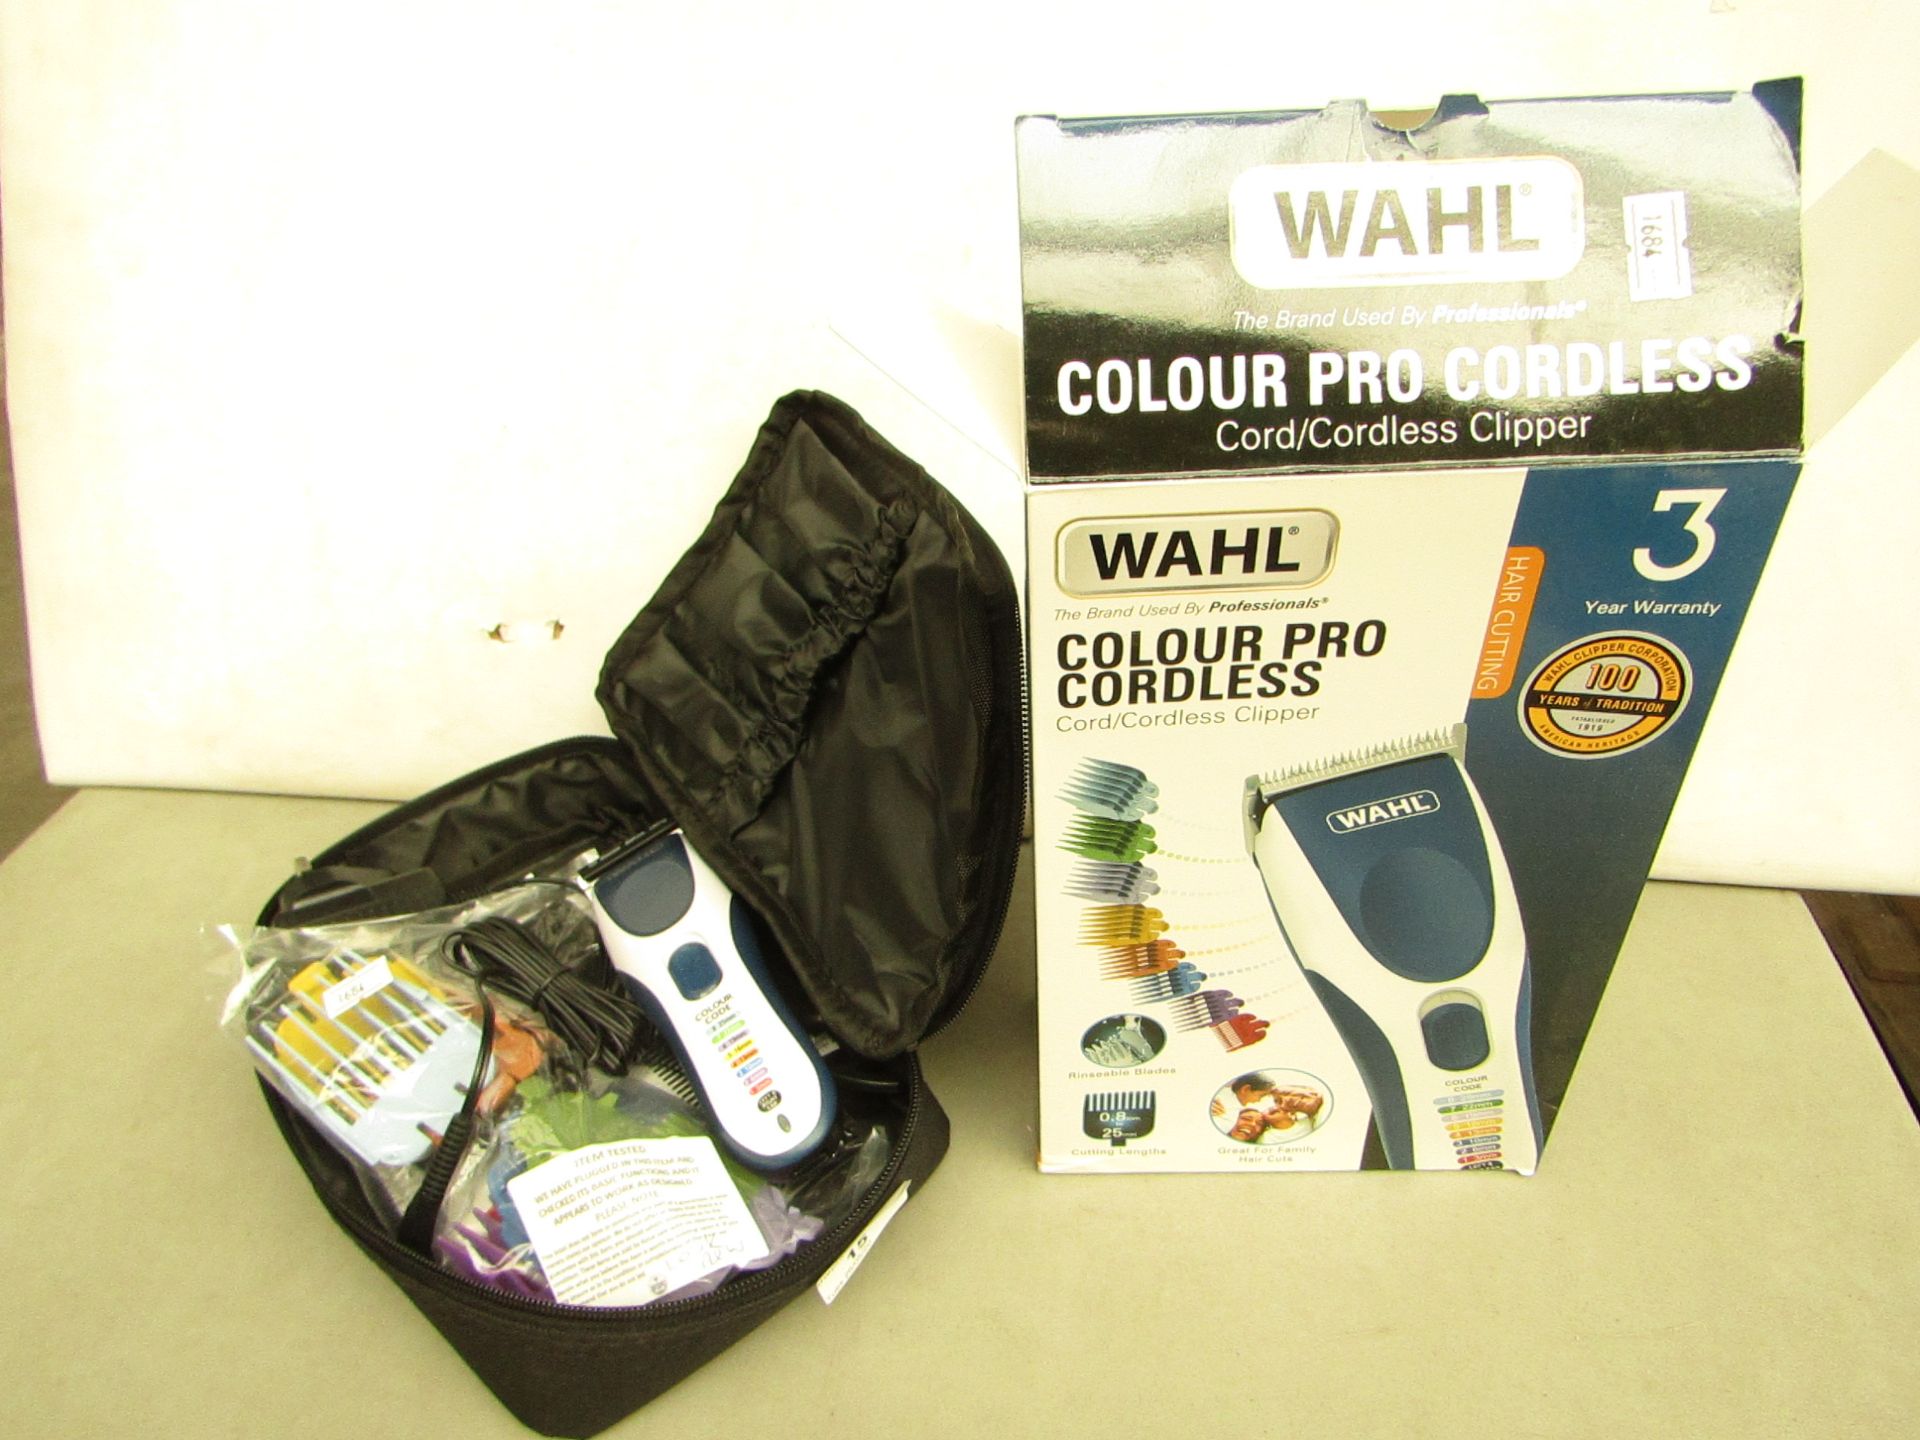 Wahl Colour Pro Cordless Clippers. Comes with Grades & Carry case. Look New & tested Working